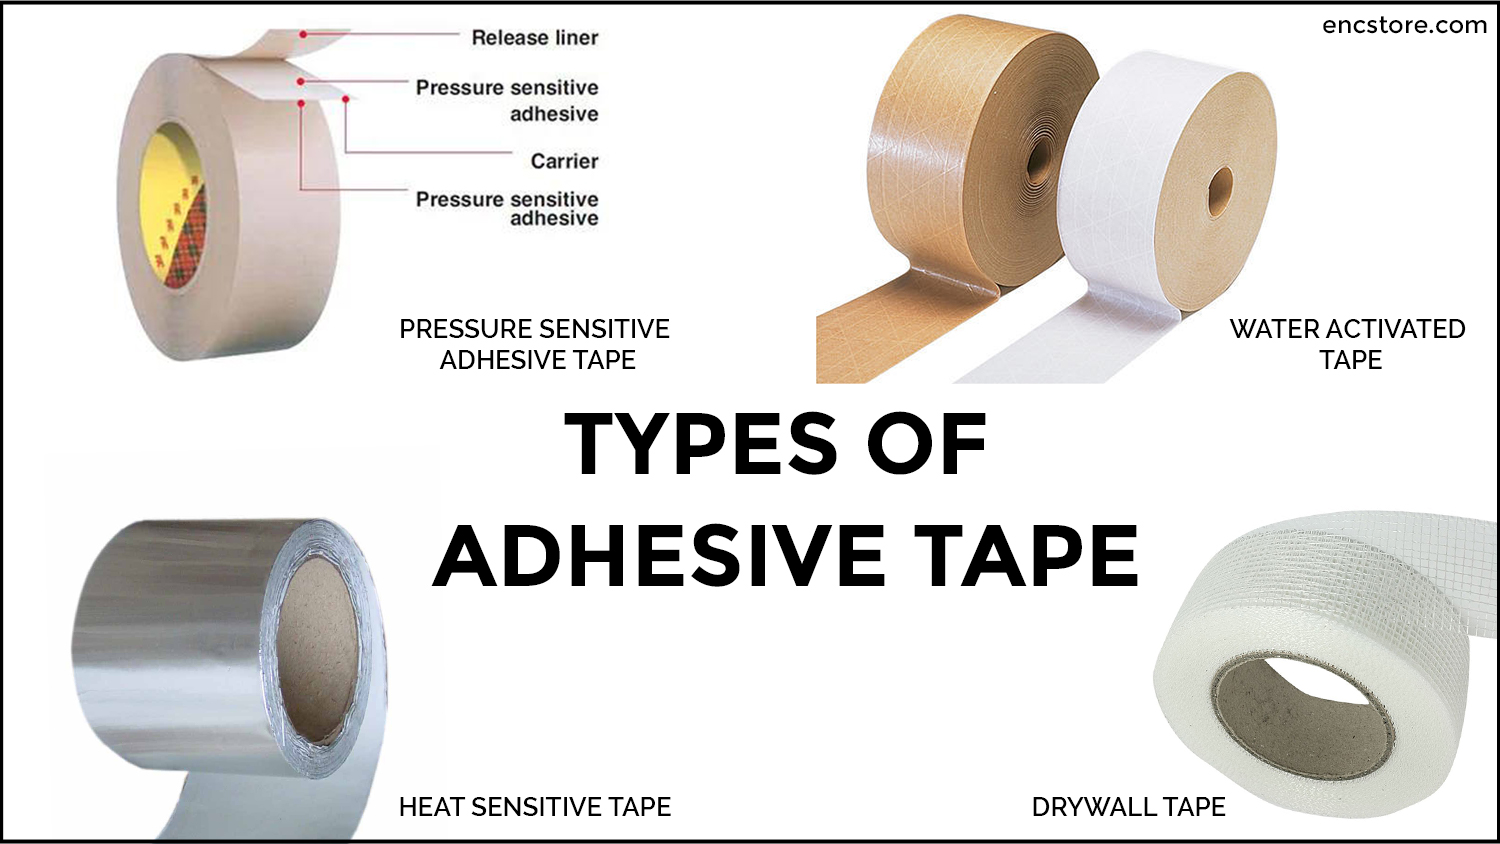 Types of Adhesive Tape